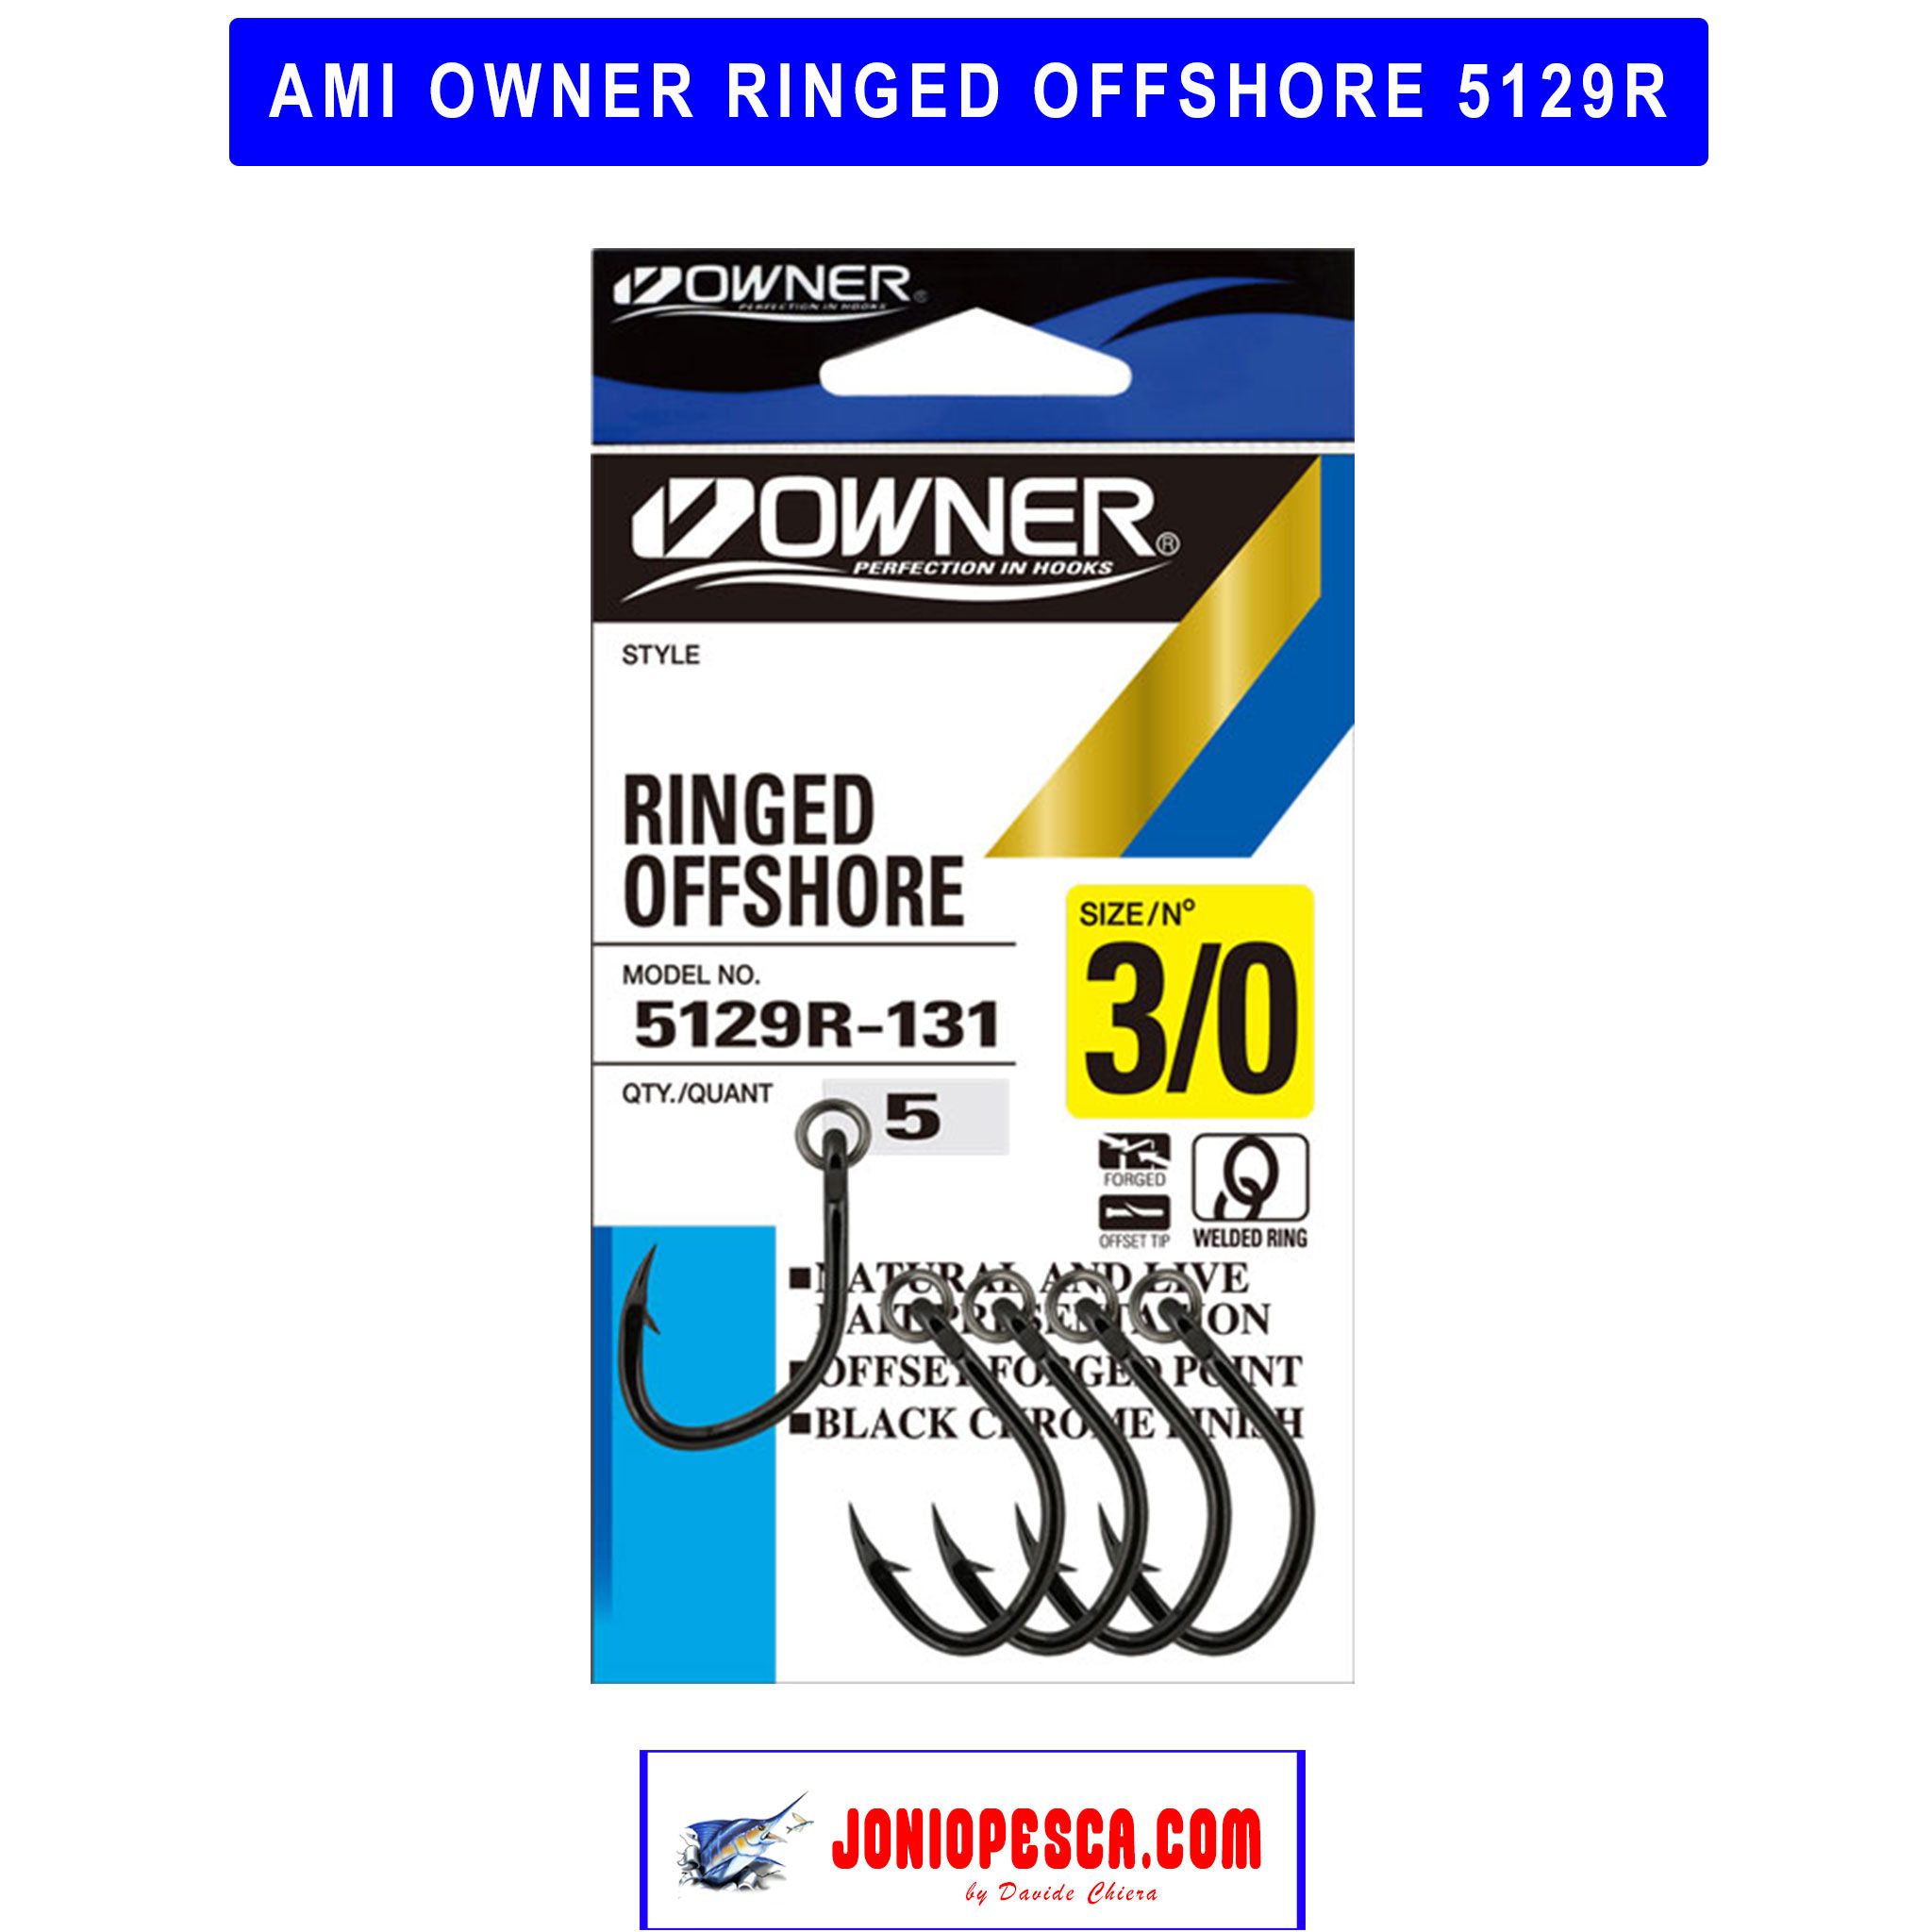 ami-owner-ringed-offshore-5129r